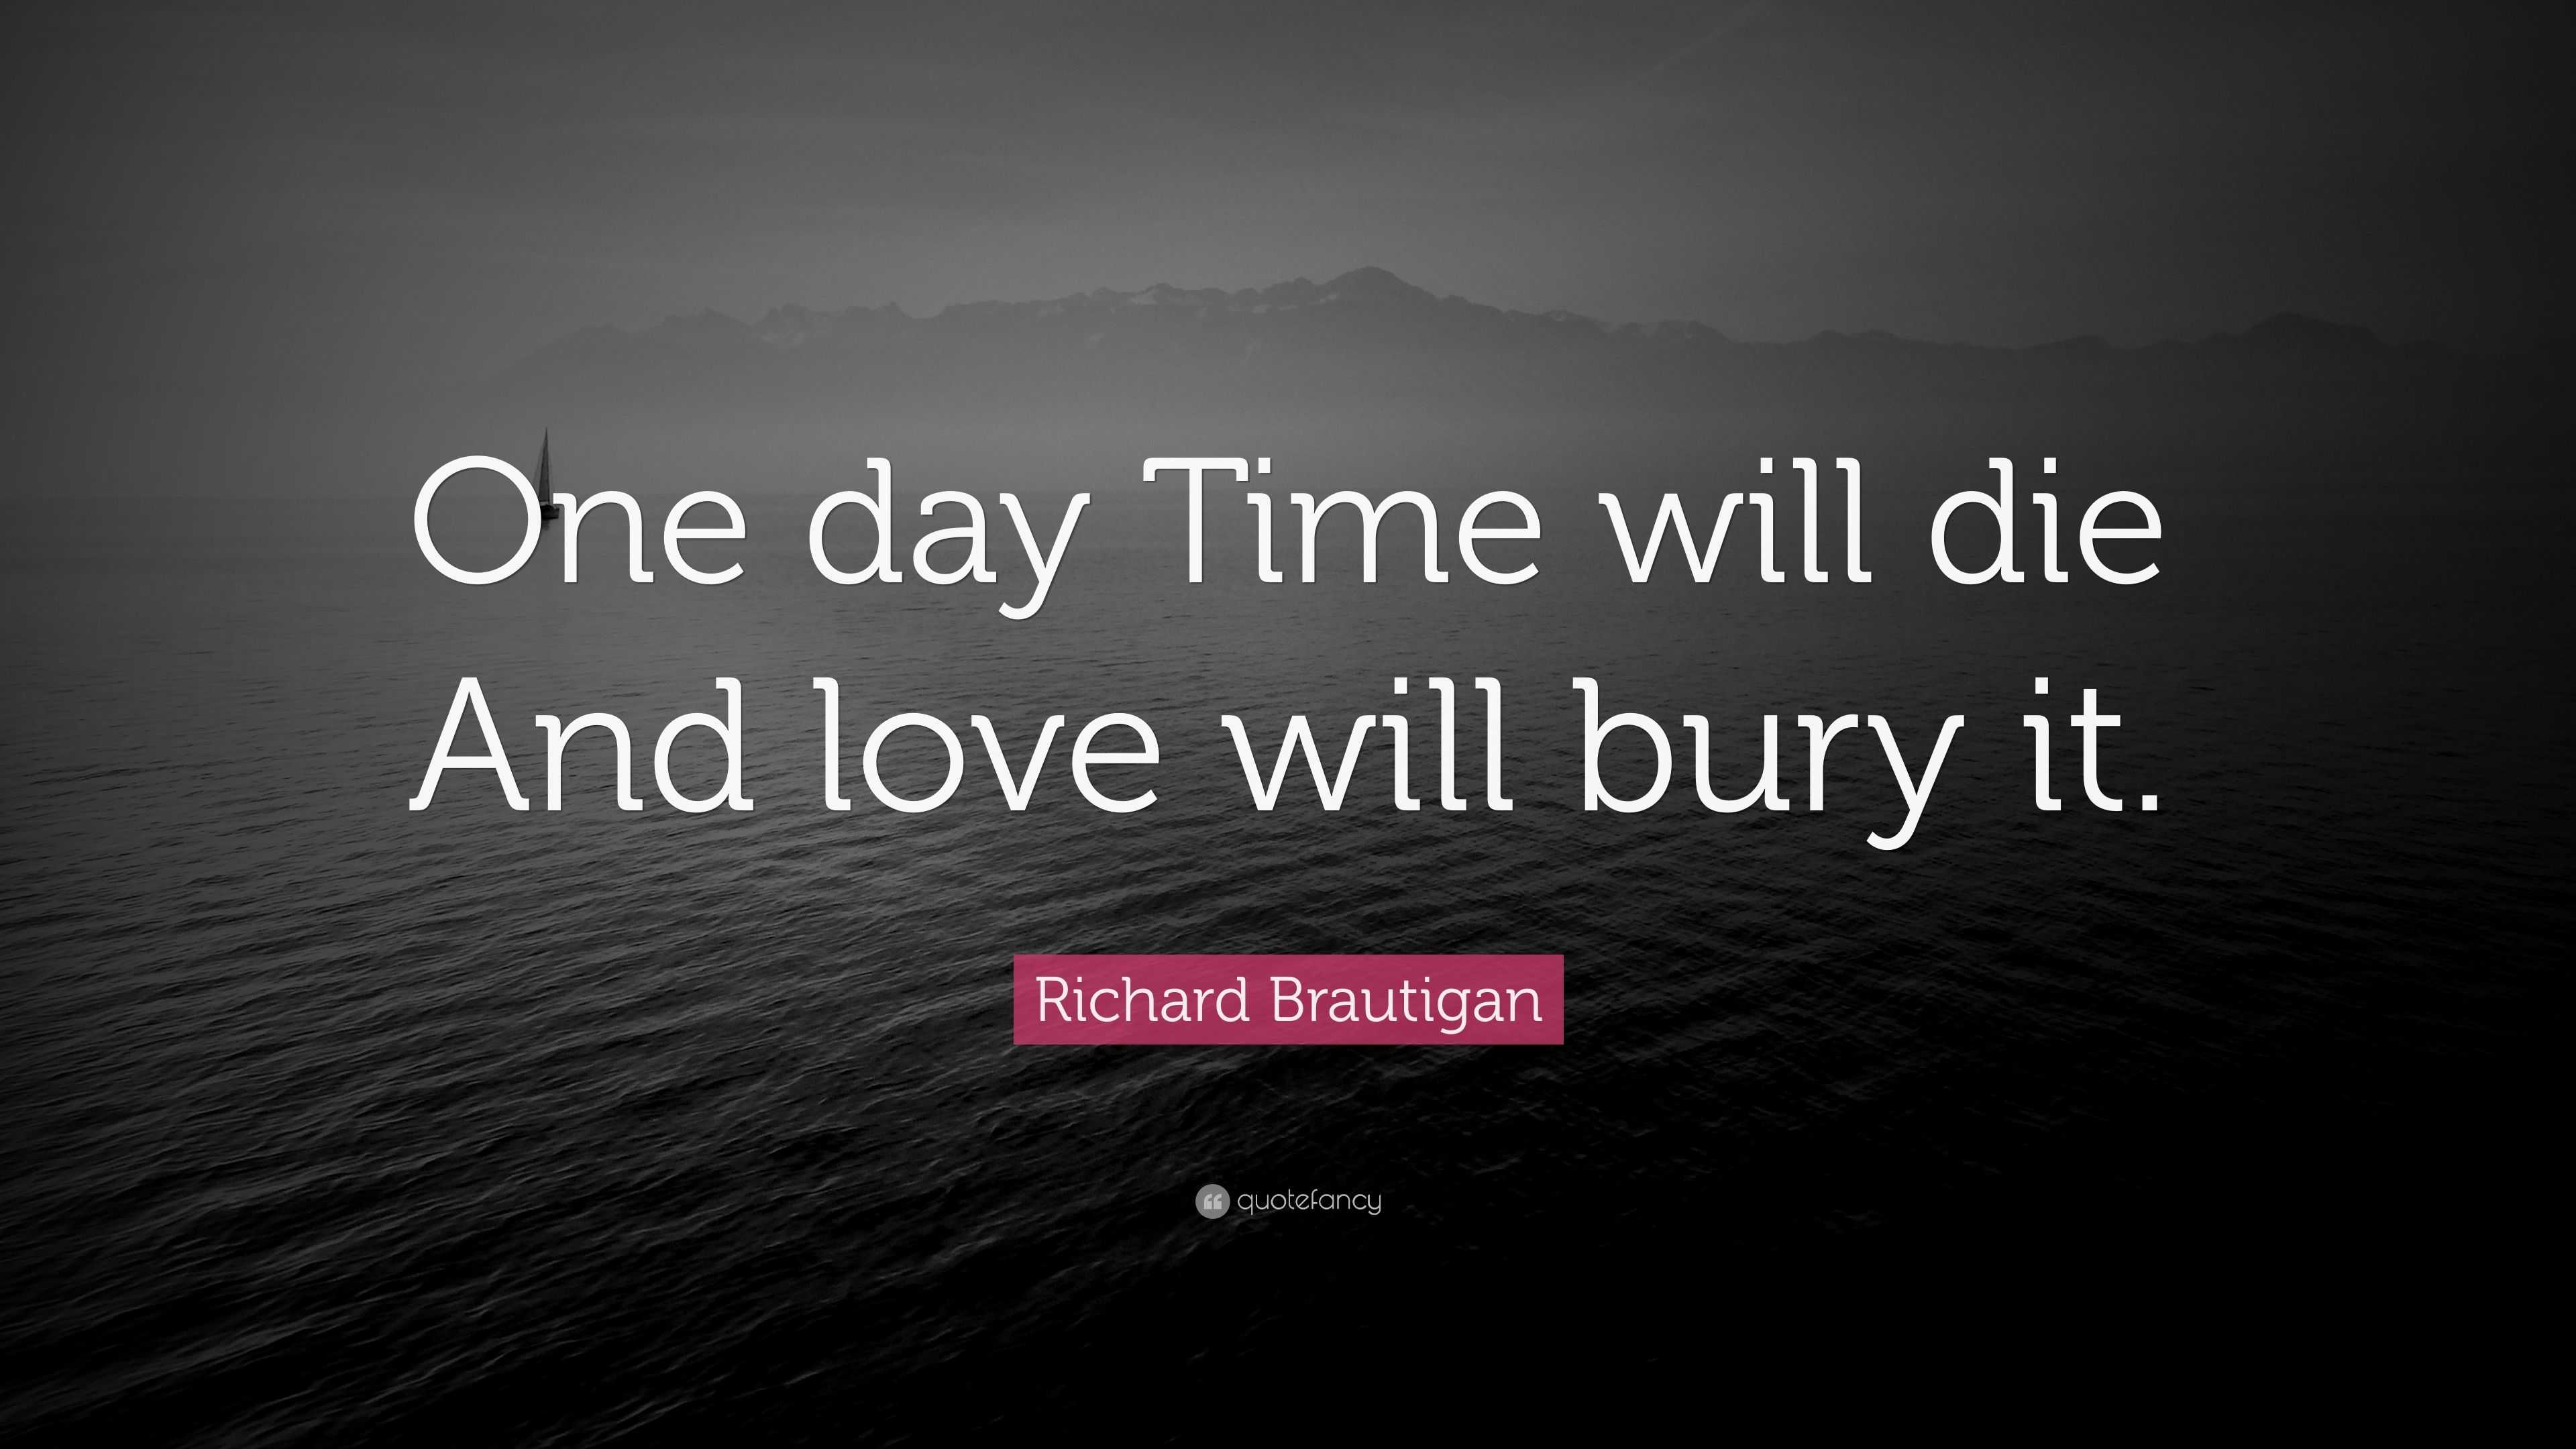 Richard Brautigan Quote “ e day Time will And love will bury it